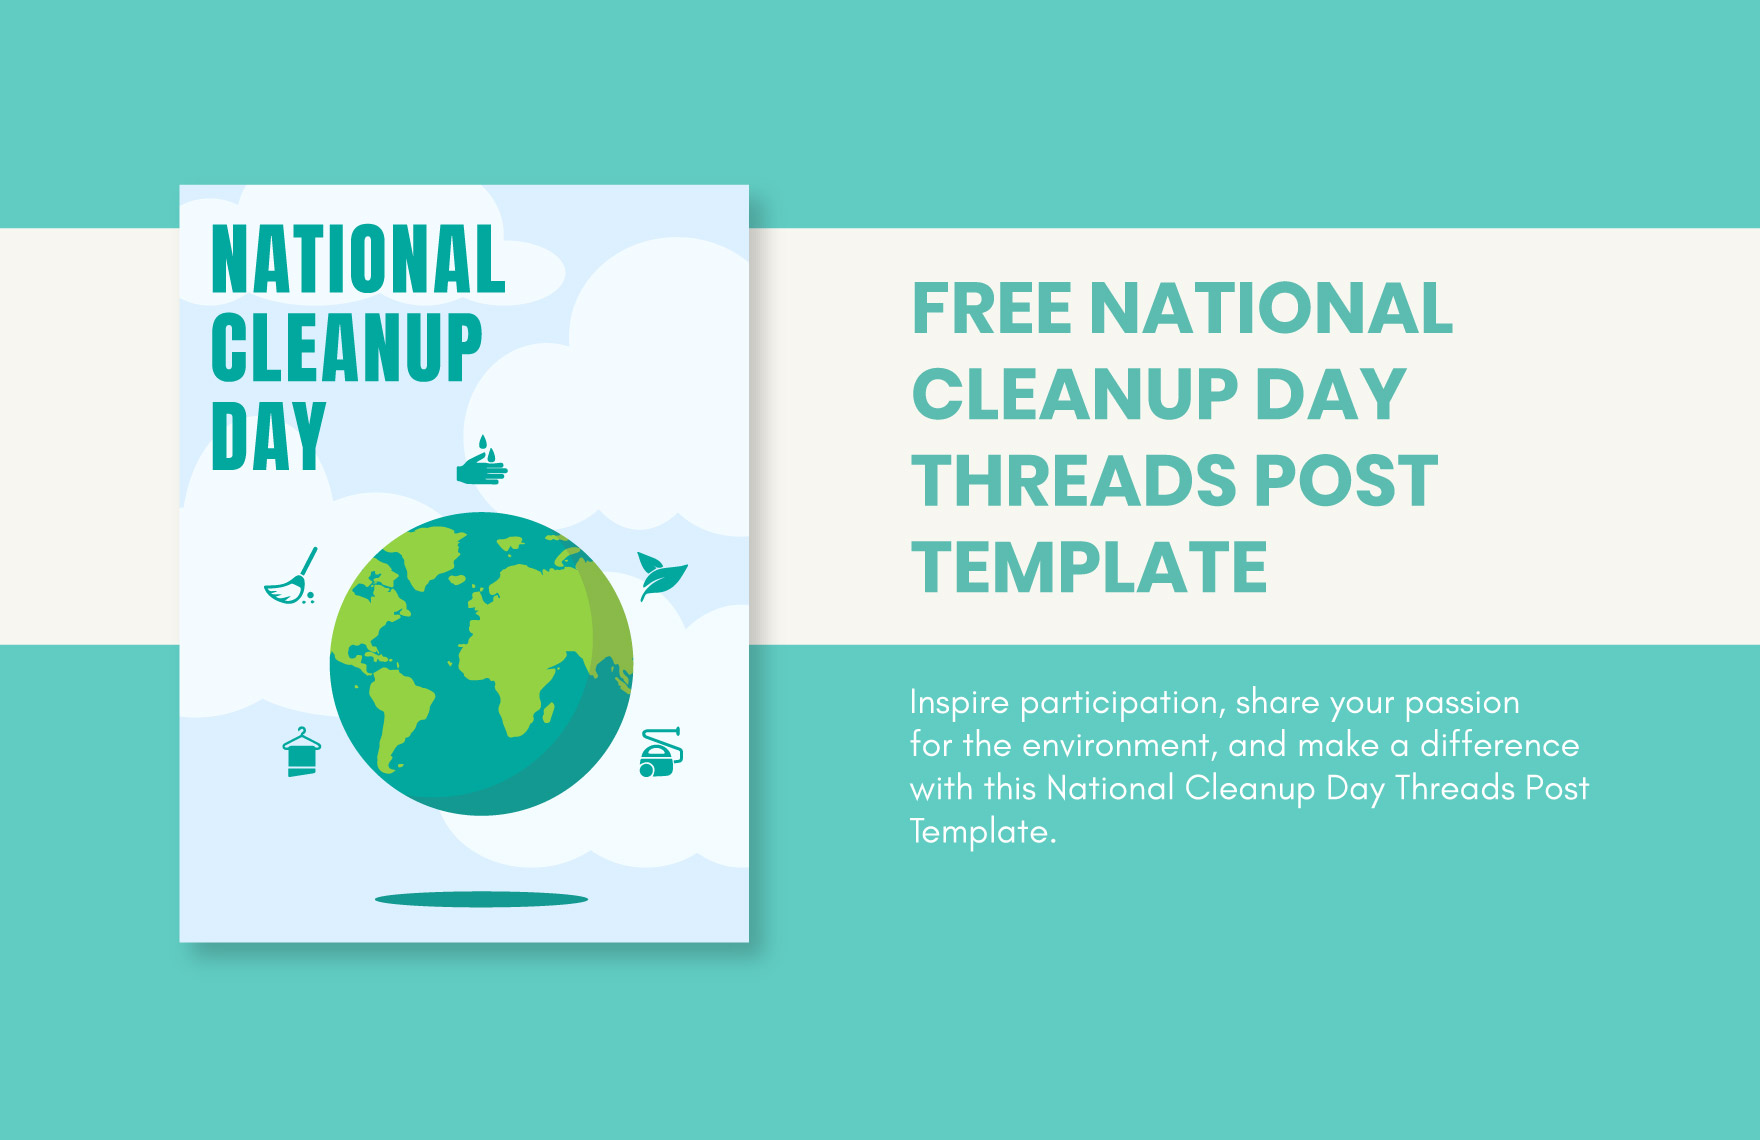 Free National CleanUp Day Threads Post Template in Illustrator, PSD, PNG